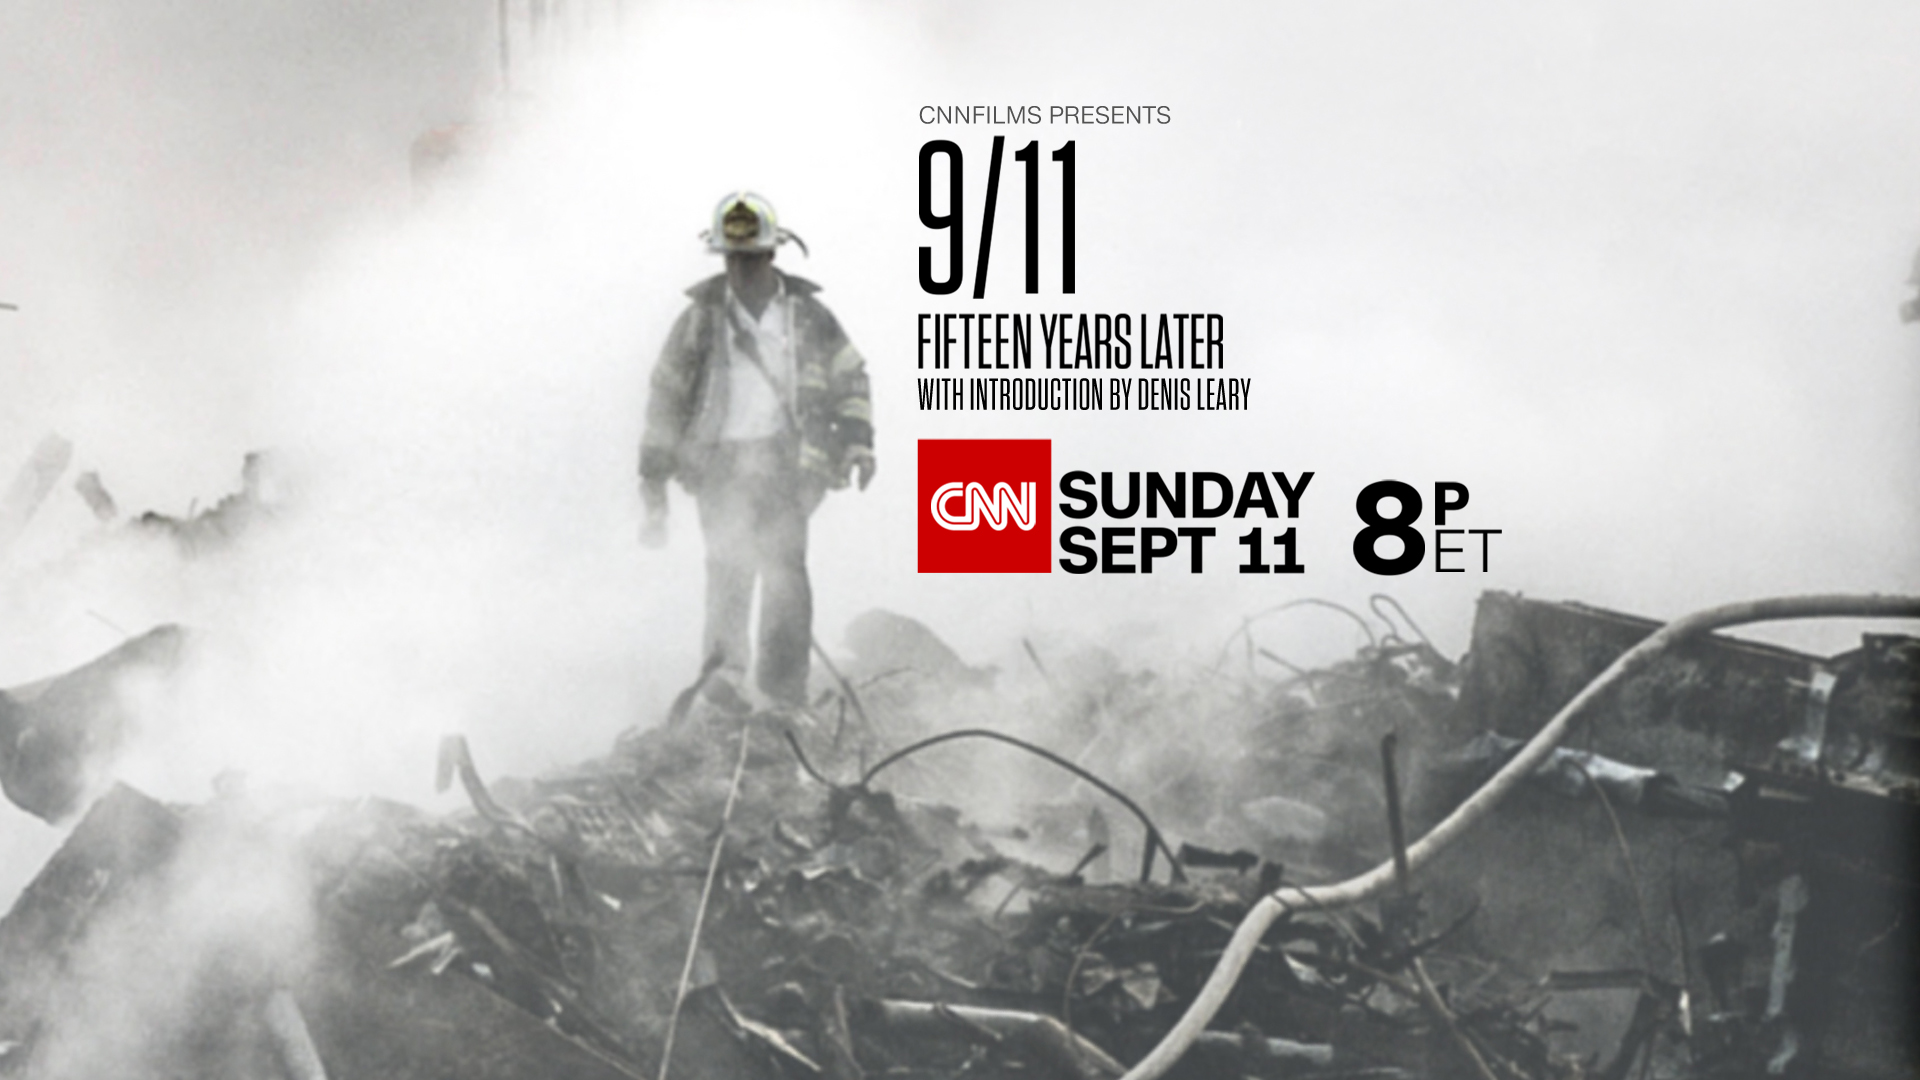 Cnn Films Acquires Co Produces Award Winning ‘9 11 Film Ahead Of 15 Year Anniversary